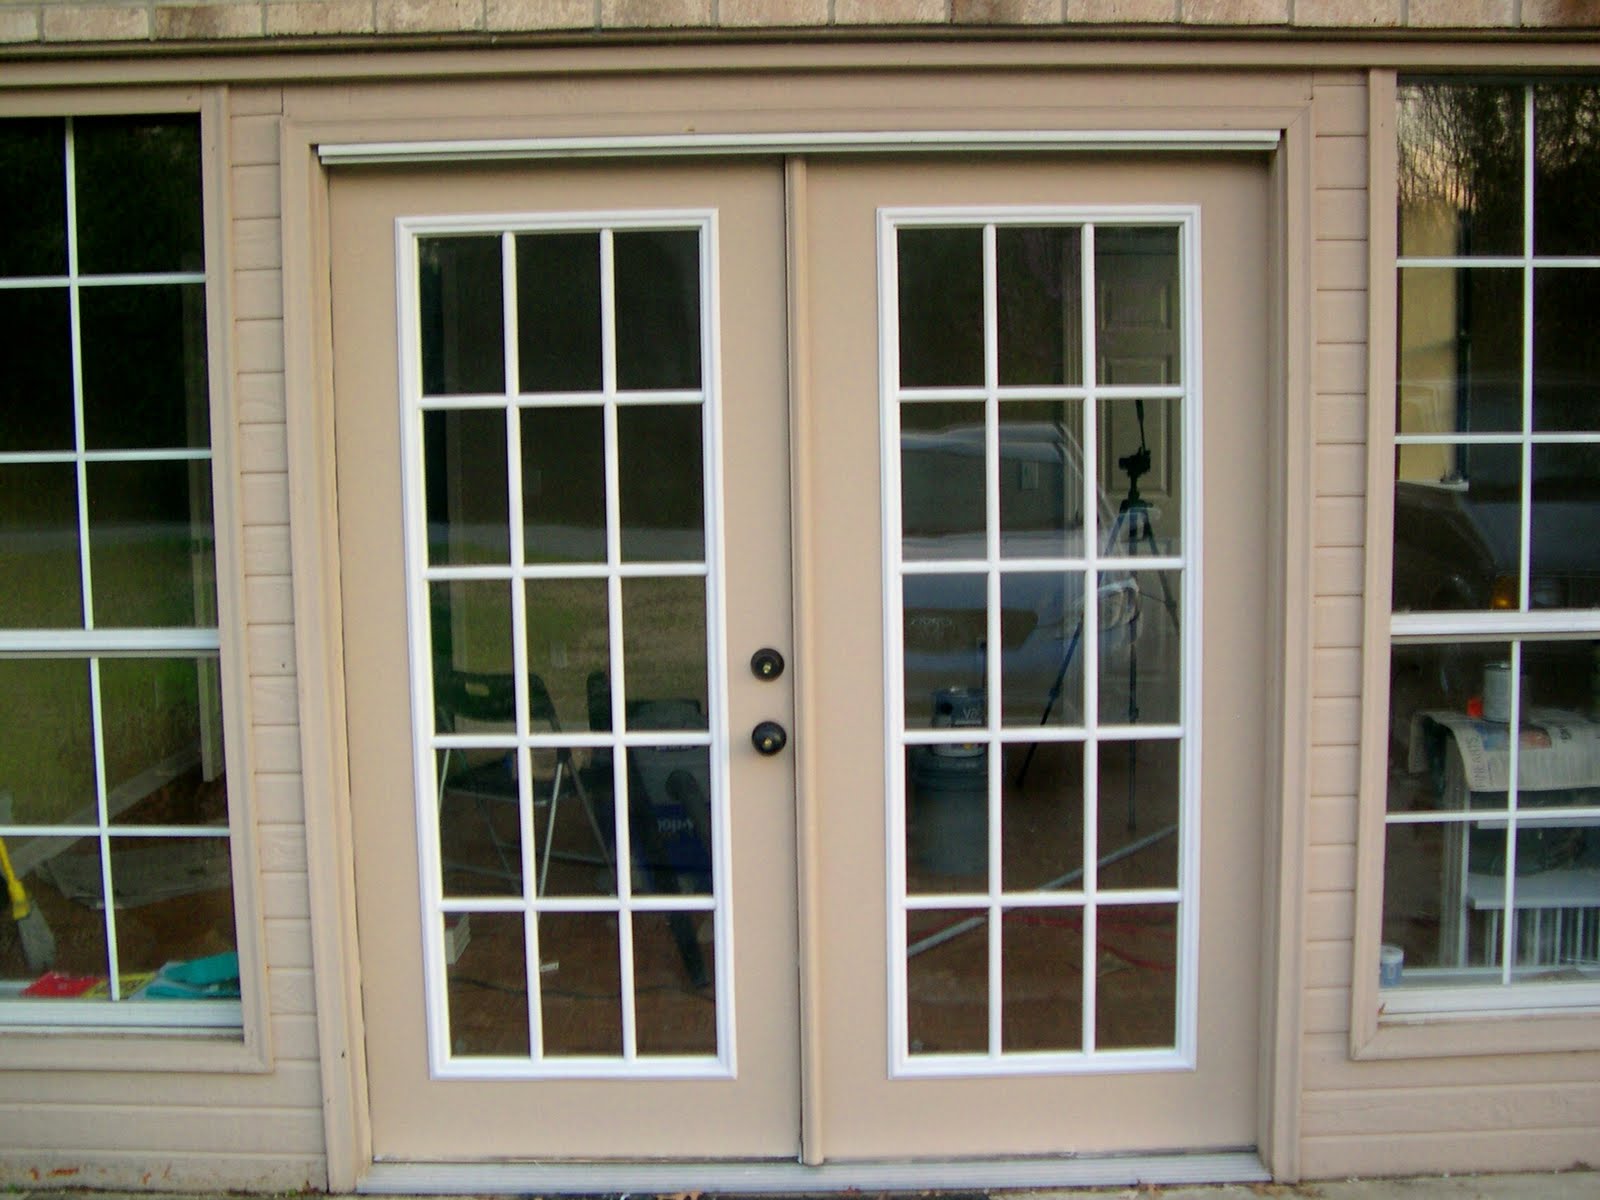 Lowes double french doors exterior - 10 reasons to install | Home ...